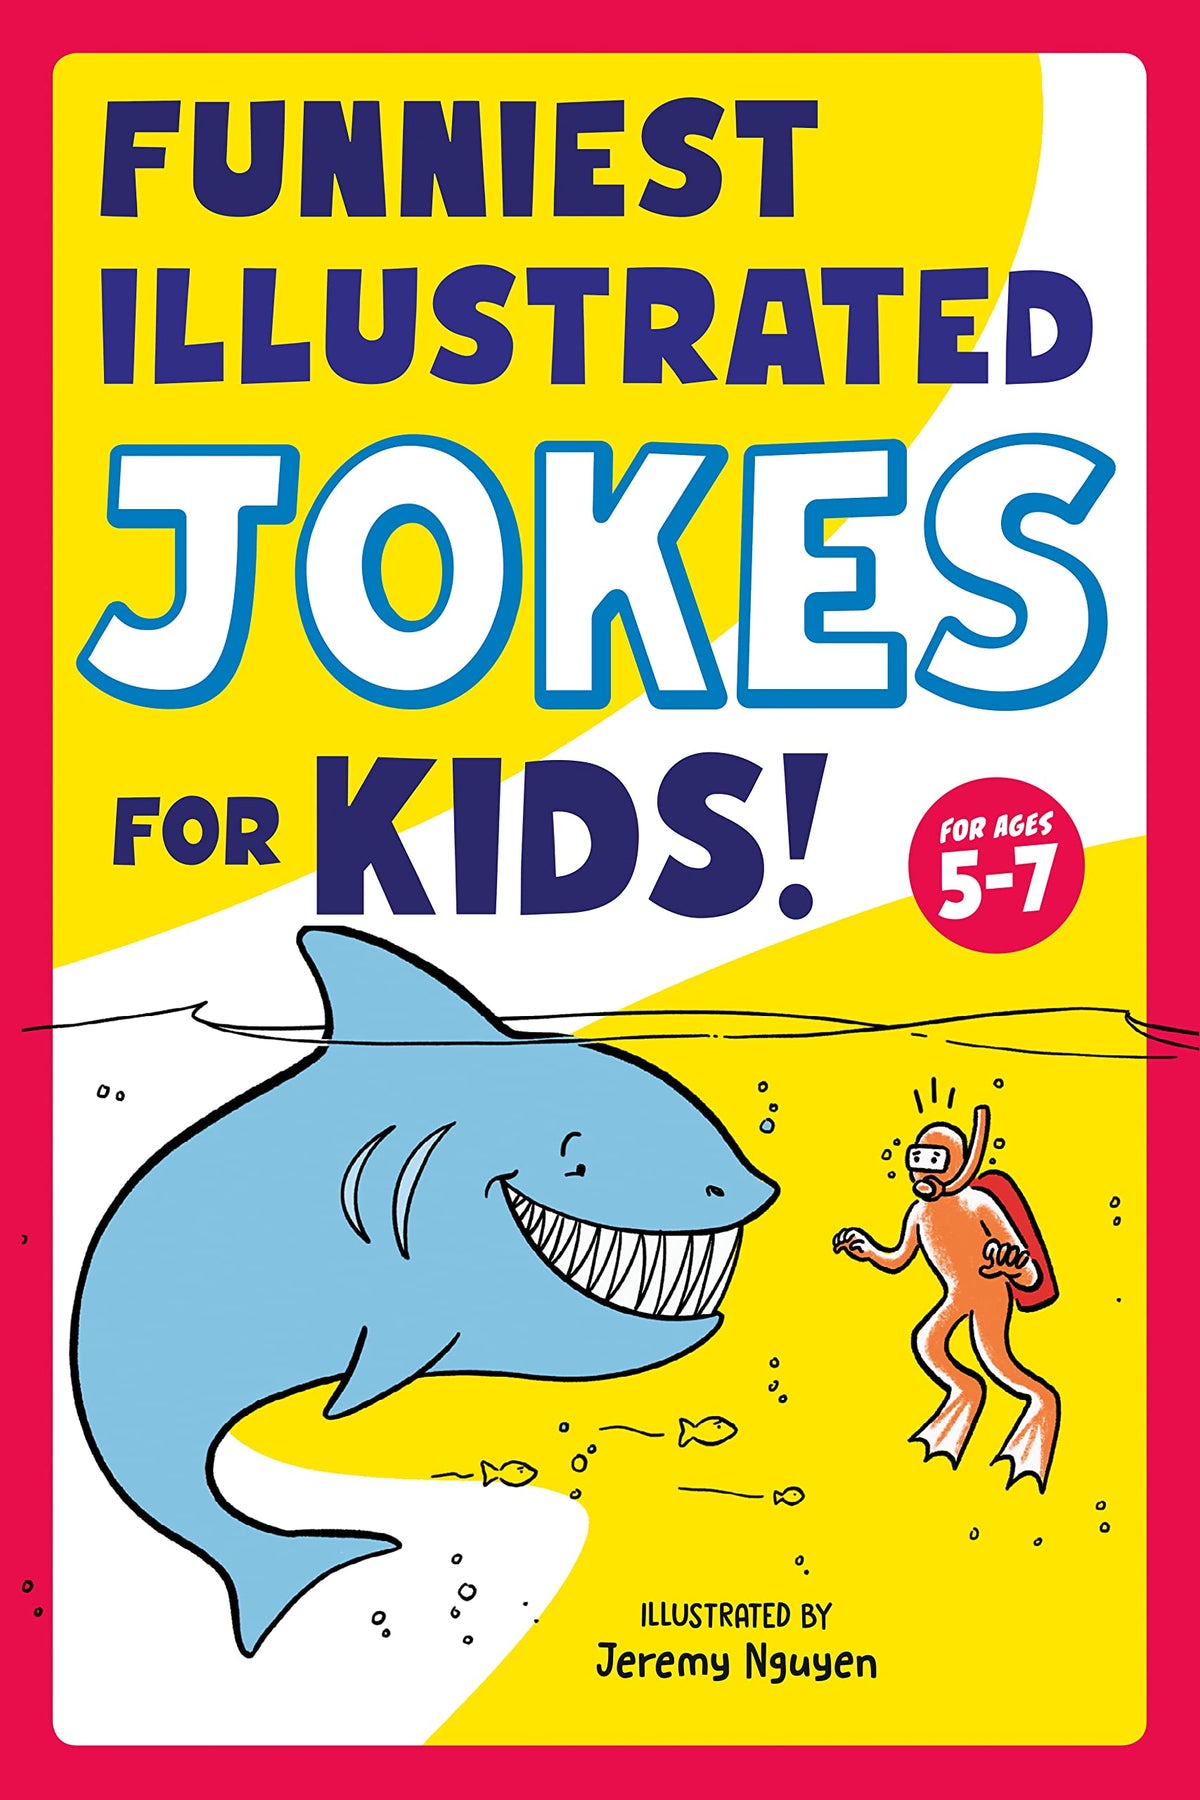 Funniest Illustrated Jokes For Kids! Cover